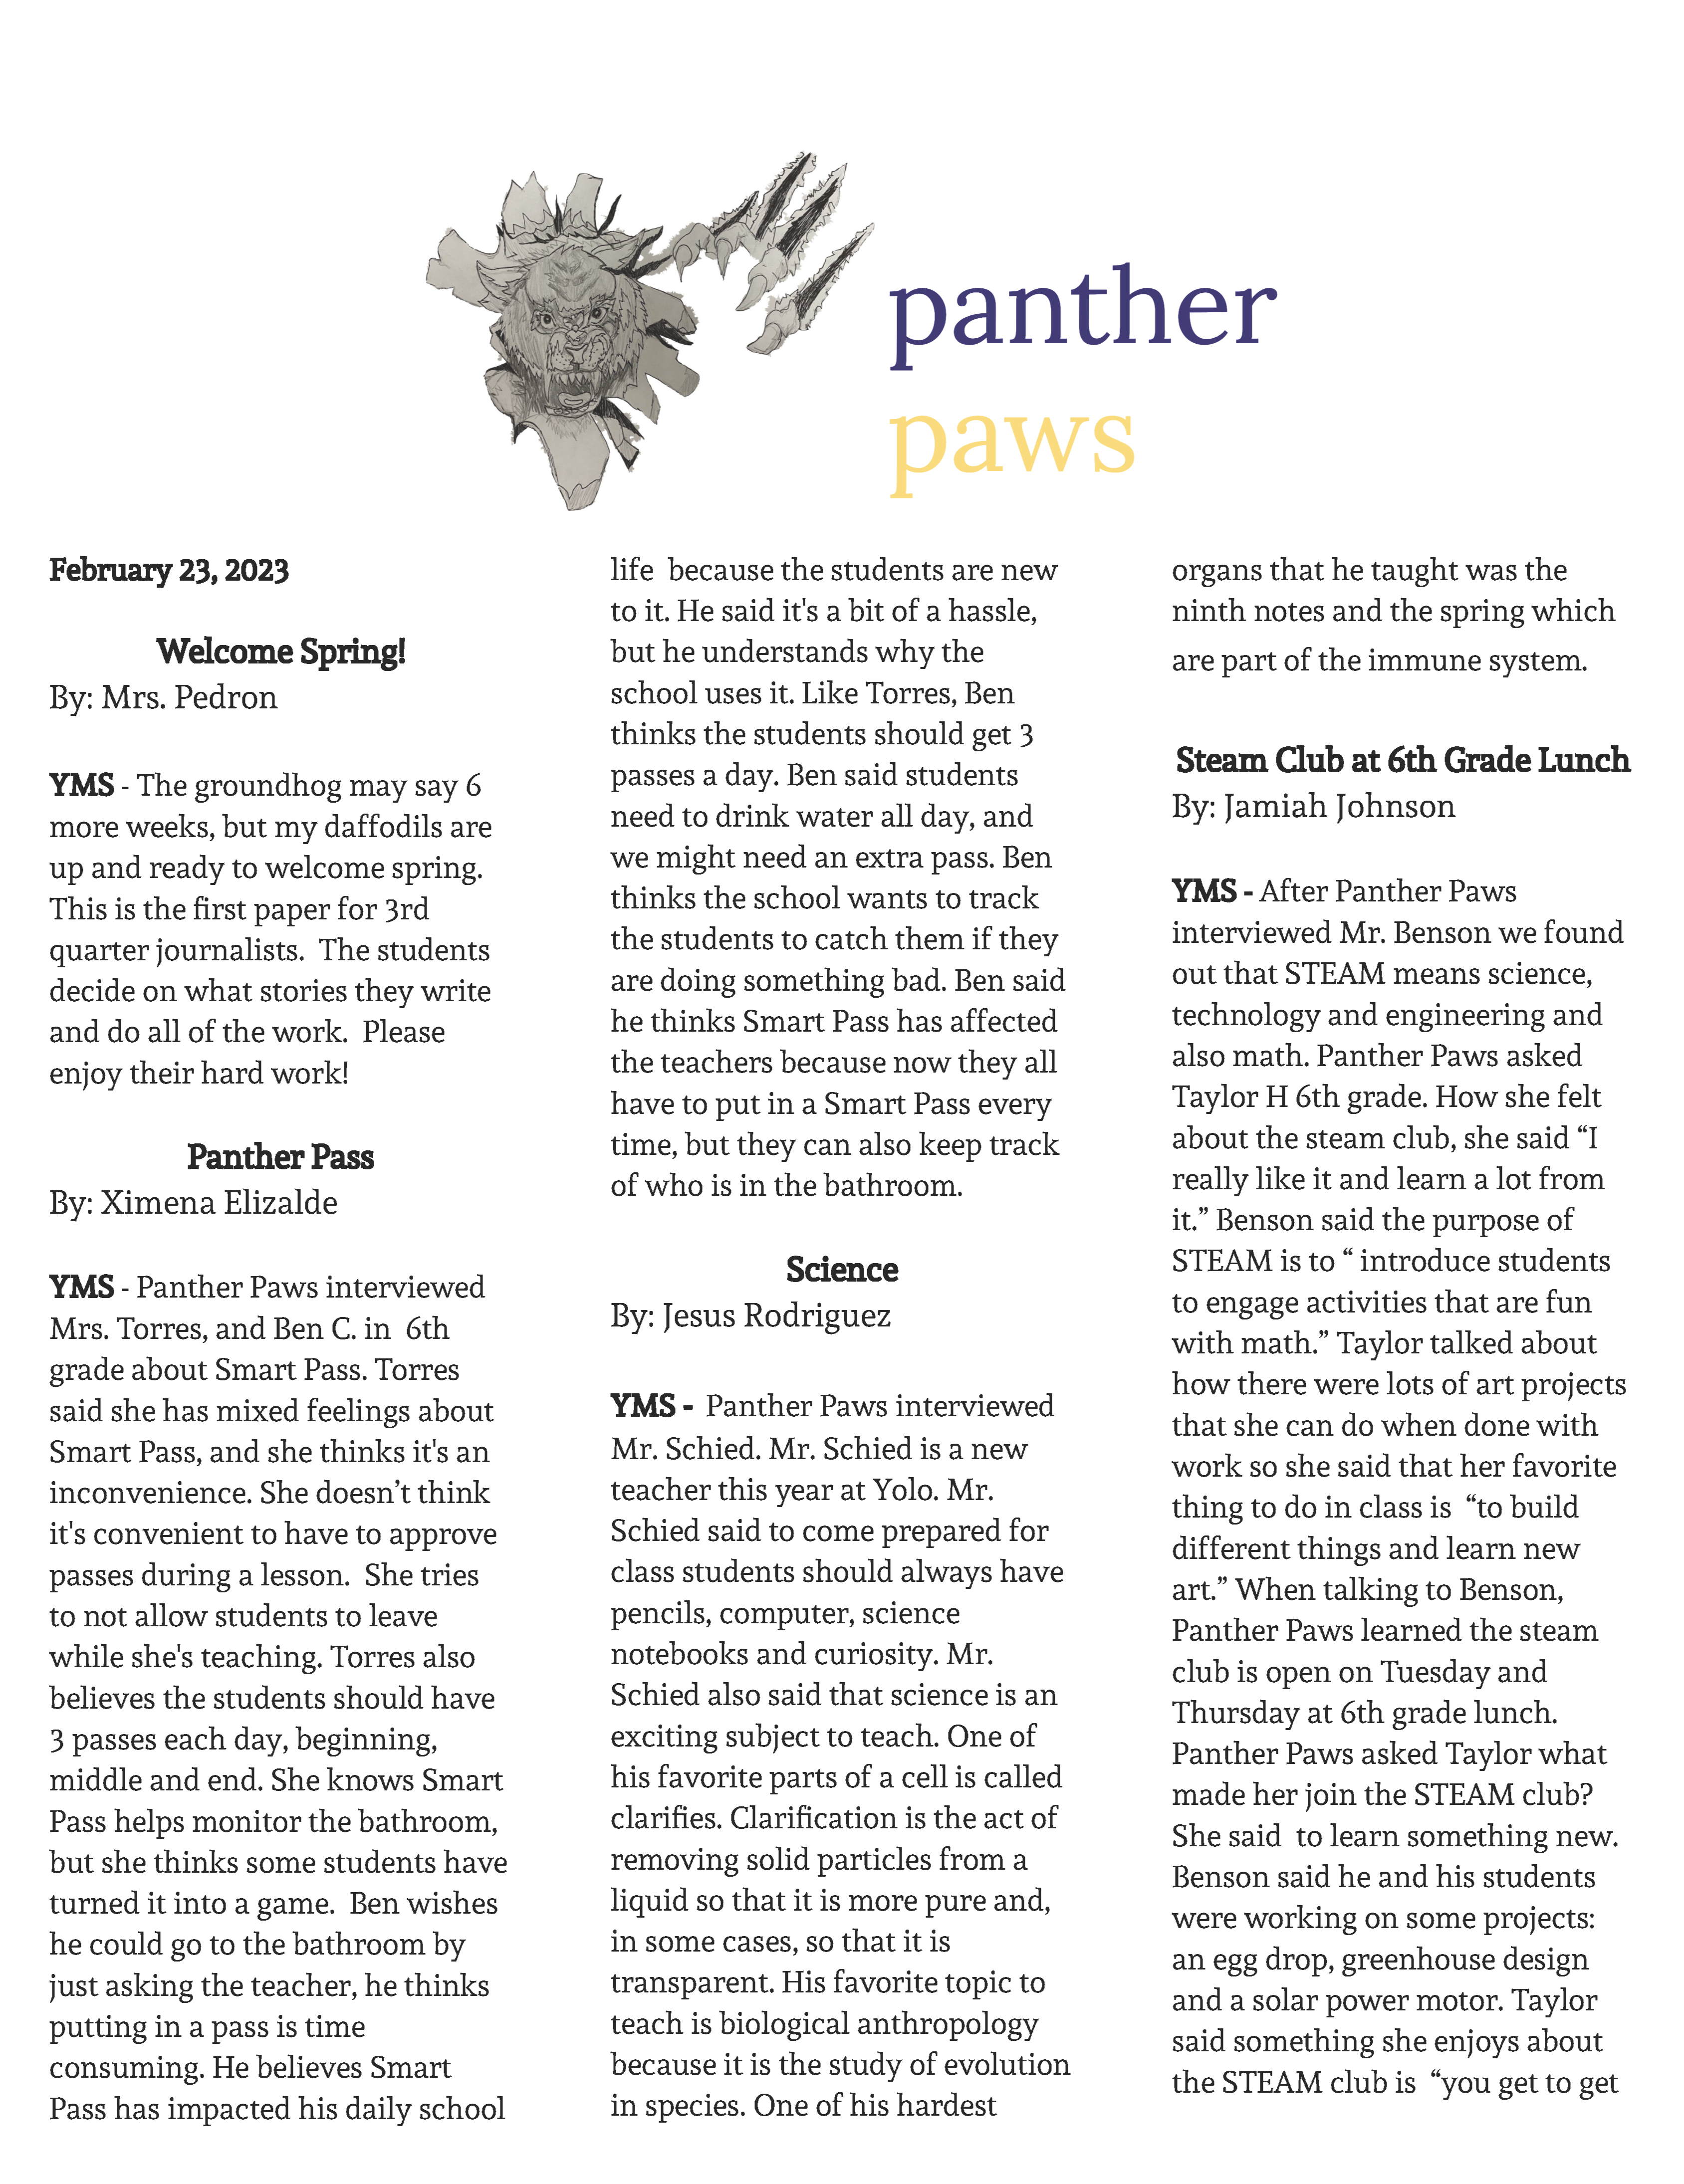 Link to February 2022 Issue off Panther Paws